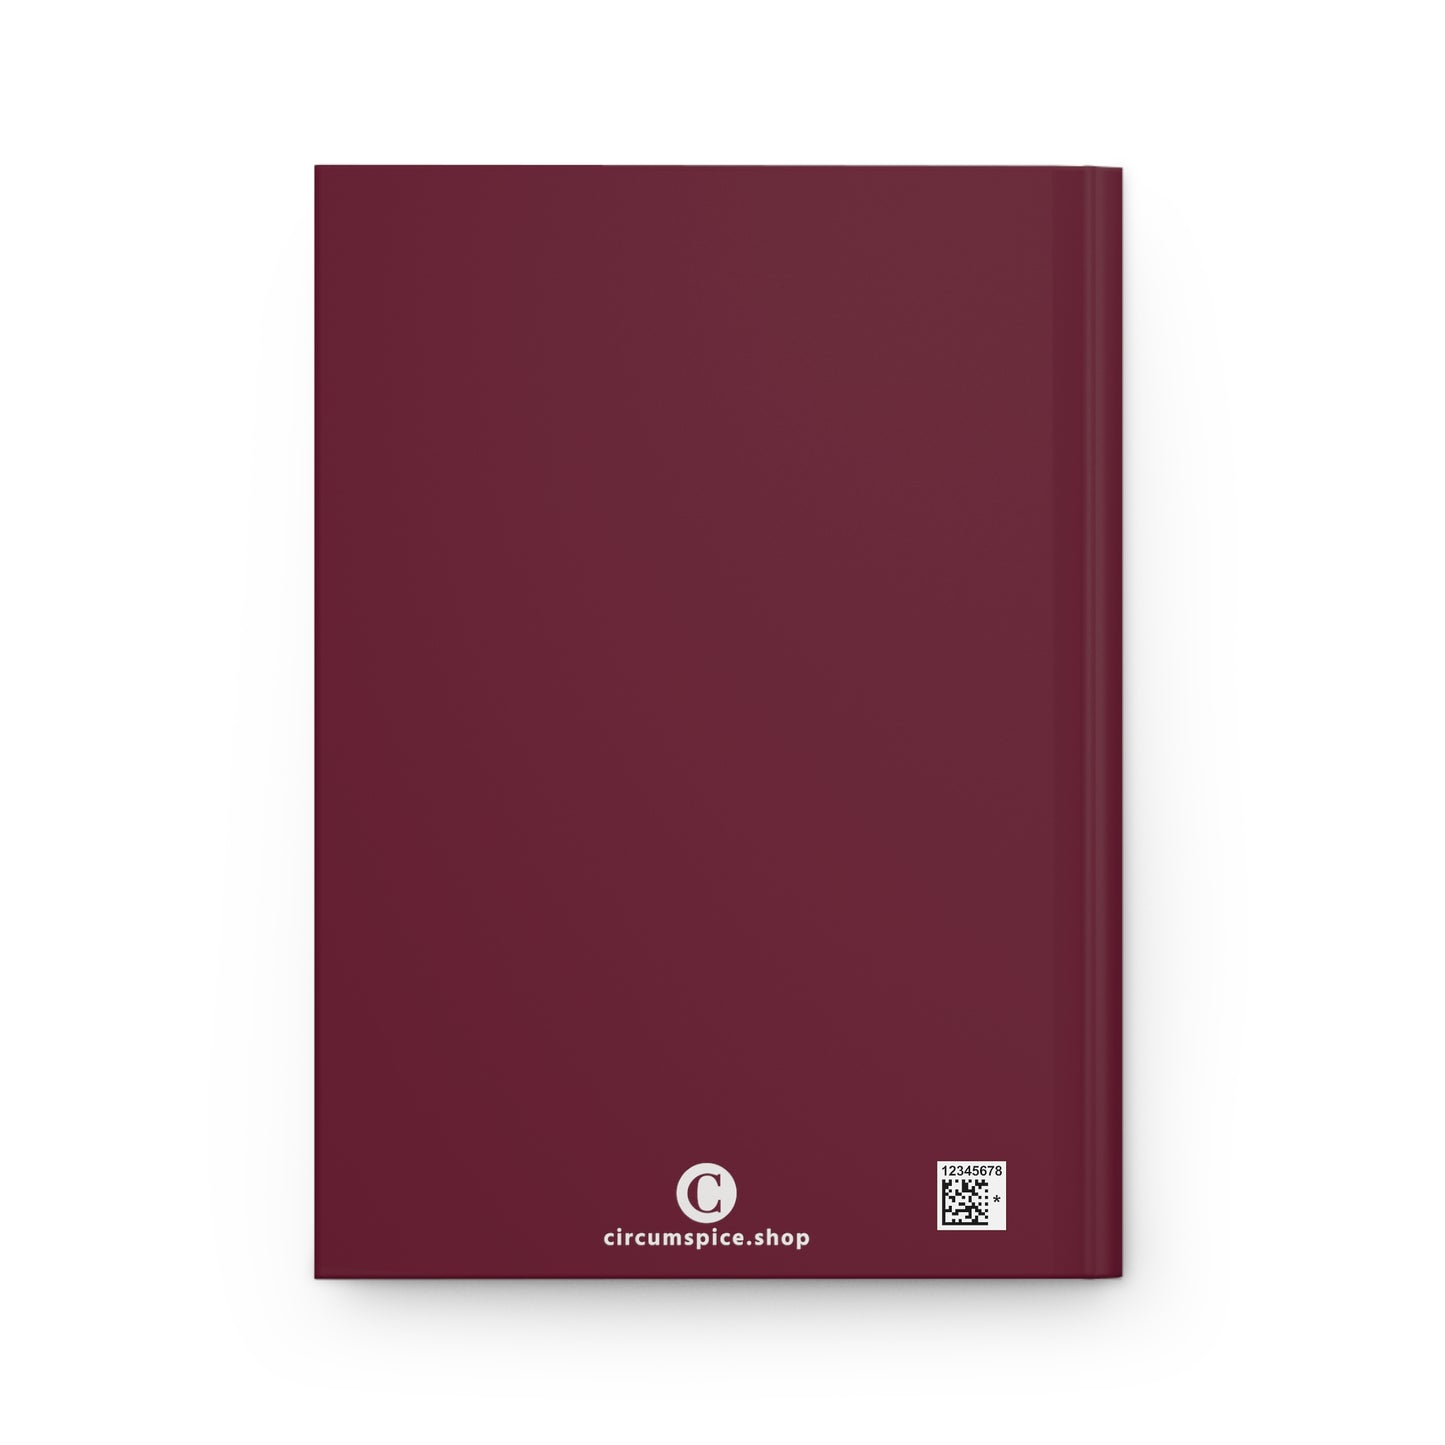 Michigan Upper Peninsula Hardcover Journal (w/ UP USA Flag) | Ruled - Old Mission Burgundy